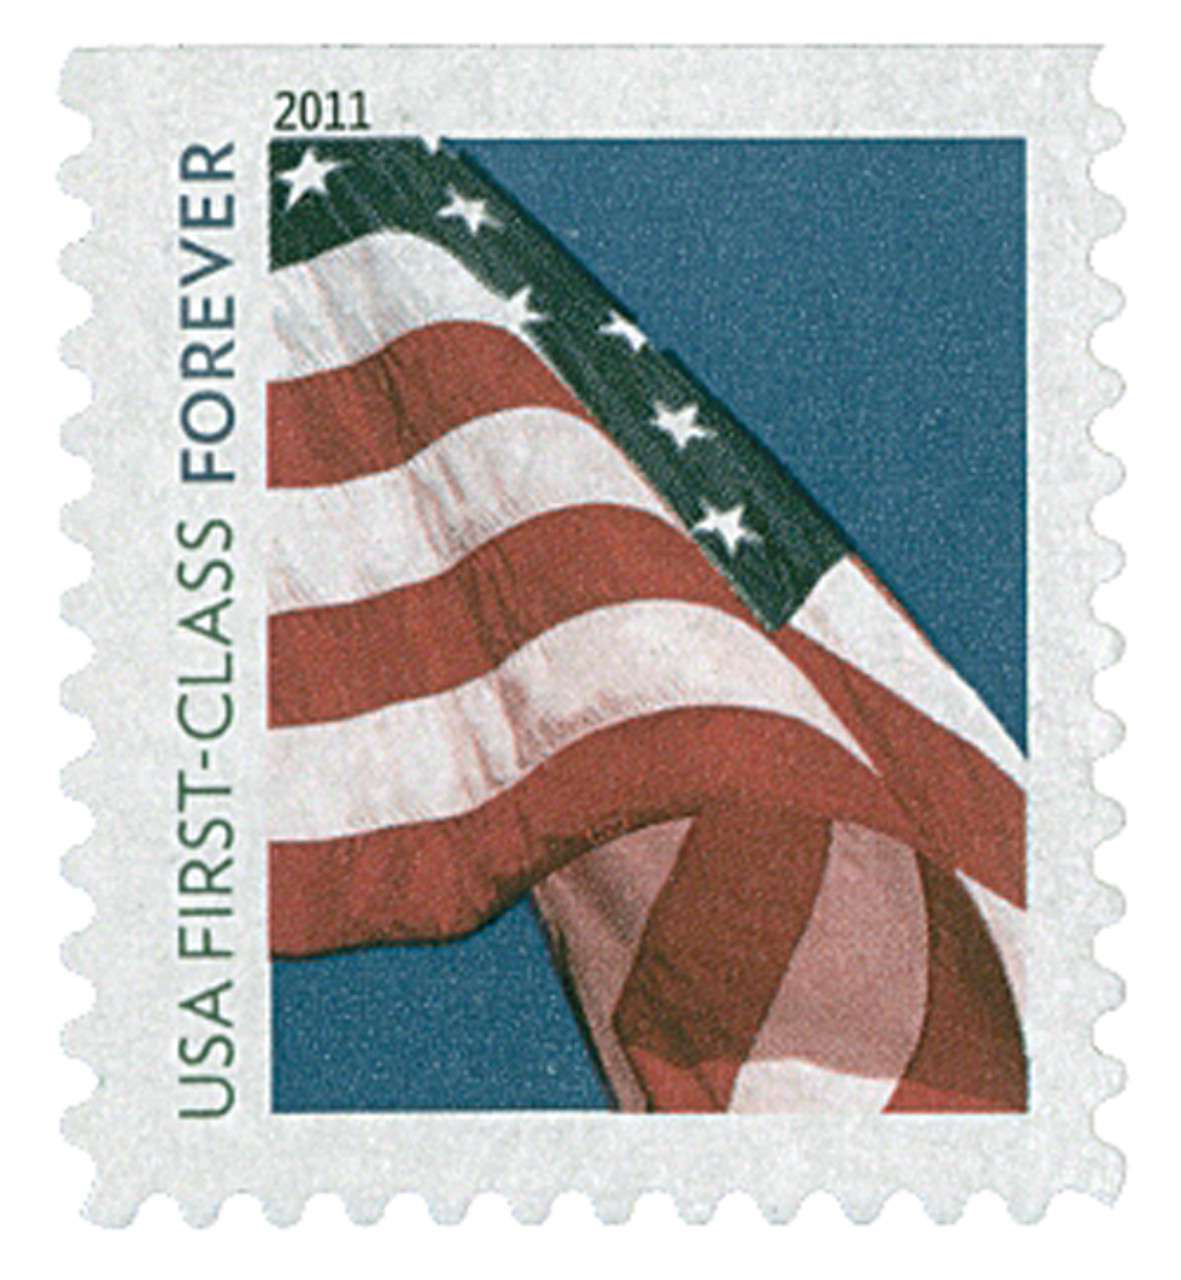 5361 - 2019 First-Class Forever Stamp - Star Ribbon - Mystic Stamp Company